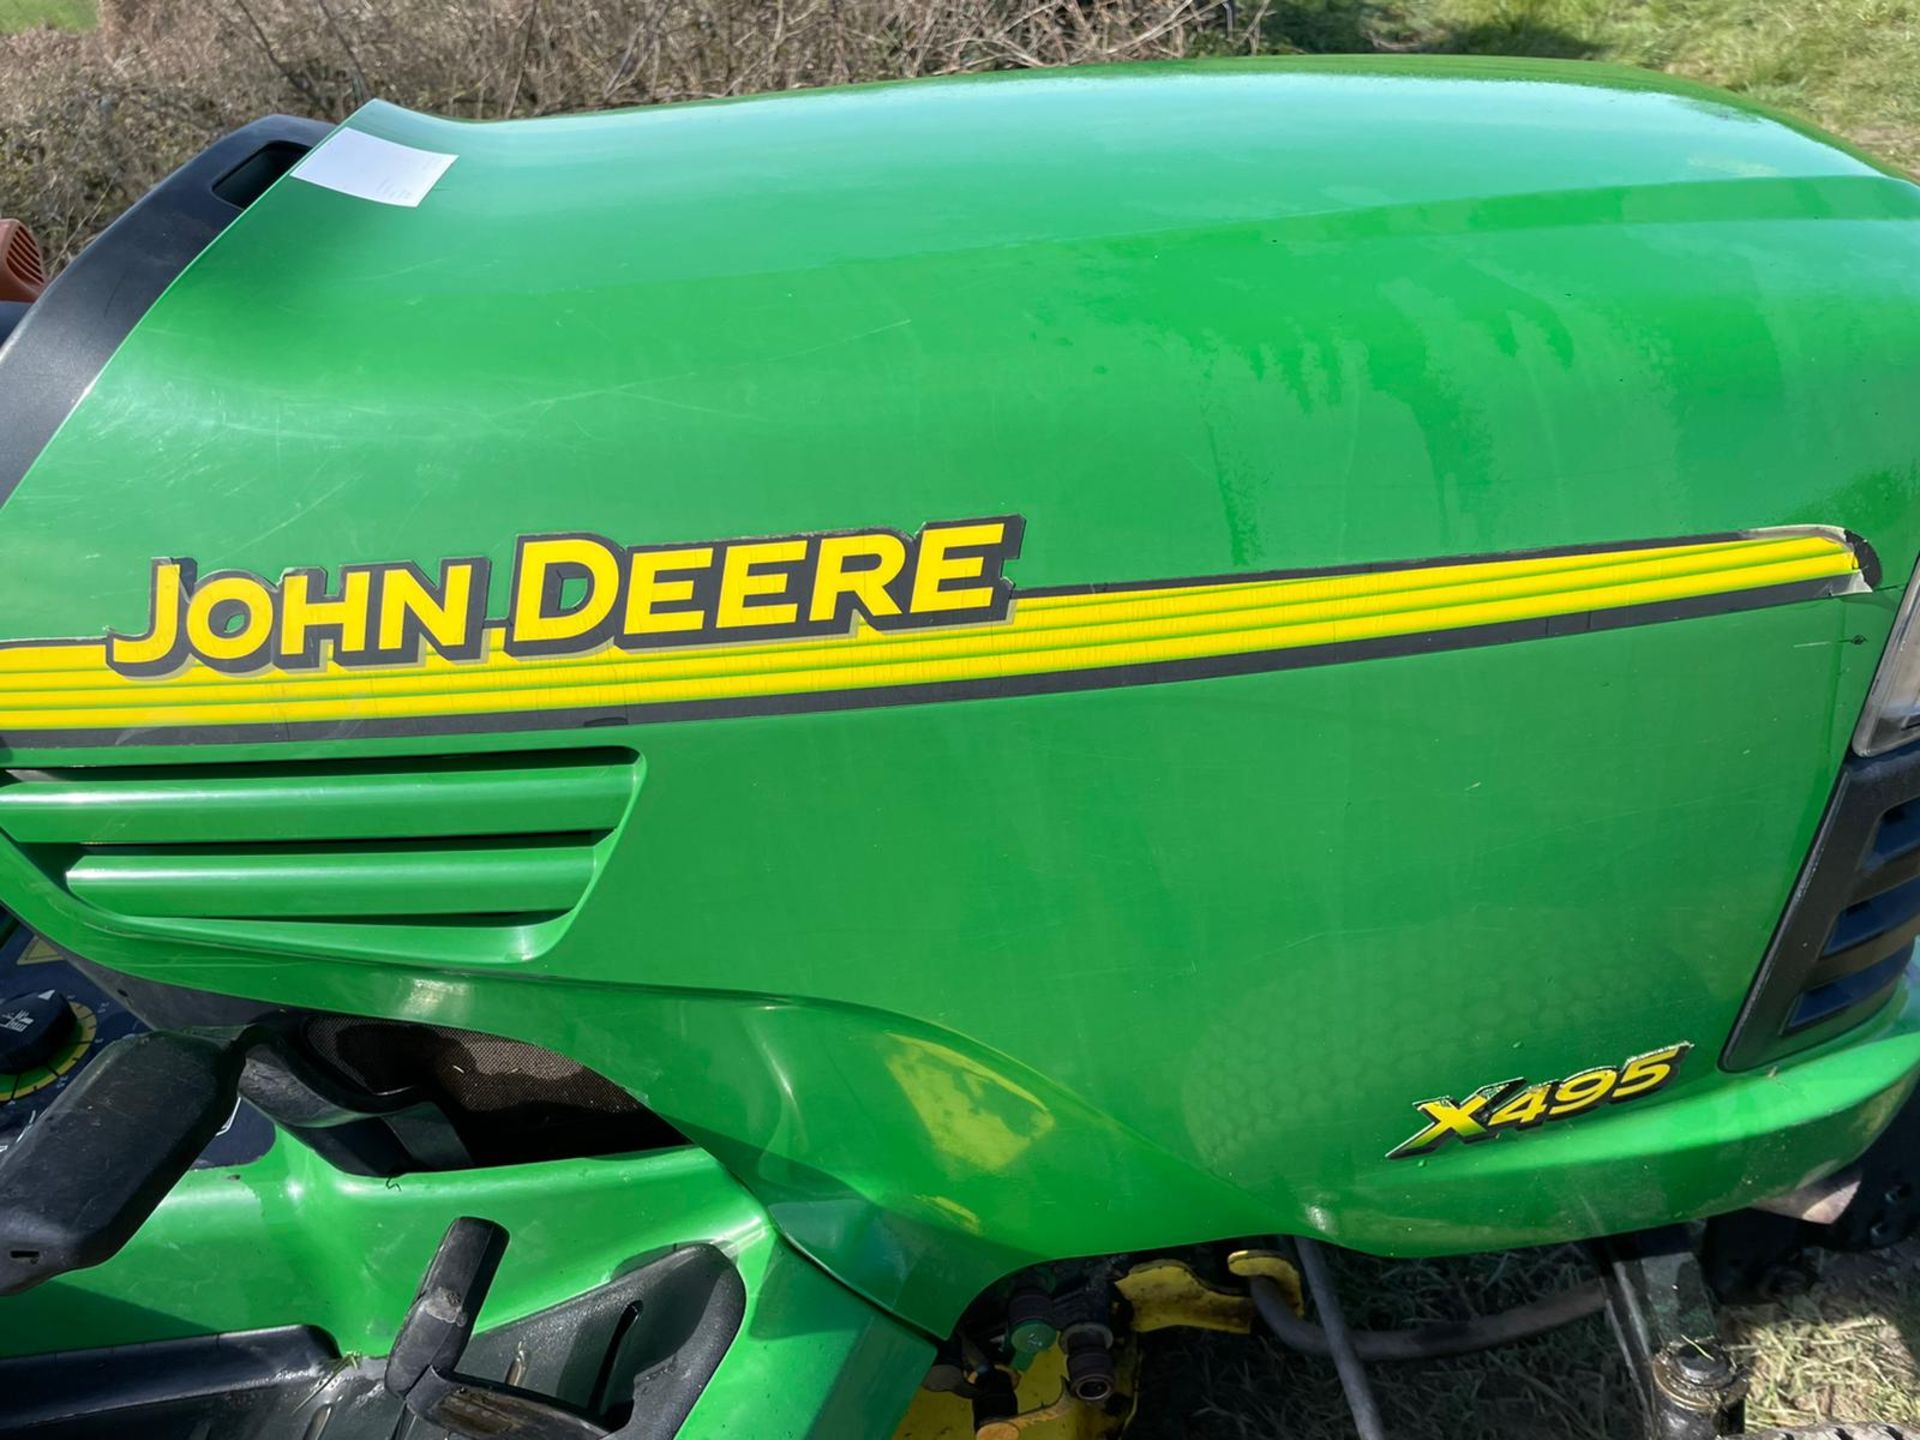 JOHN DEERE X495 RIDE ON MOWER, RUNS DRIVES AND CUTS, HYDROSTATIC, LOW 1460 HOURS *PLUS VAT* - Image 7 of 9